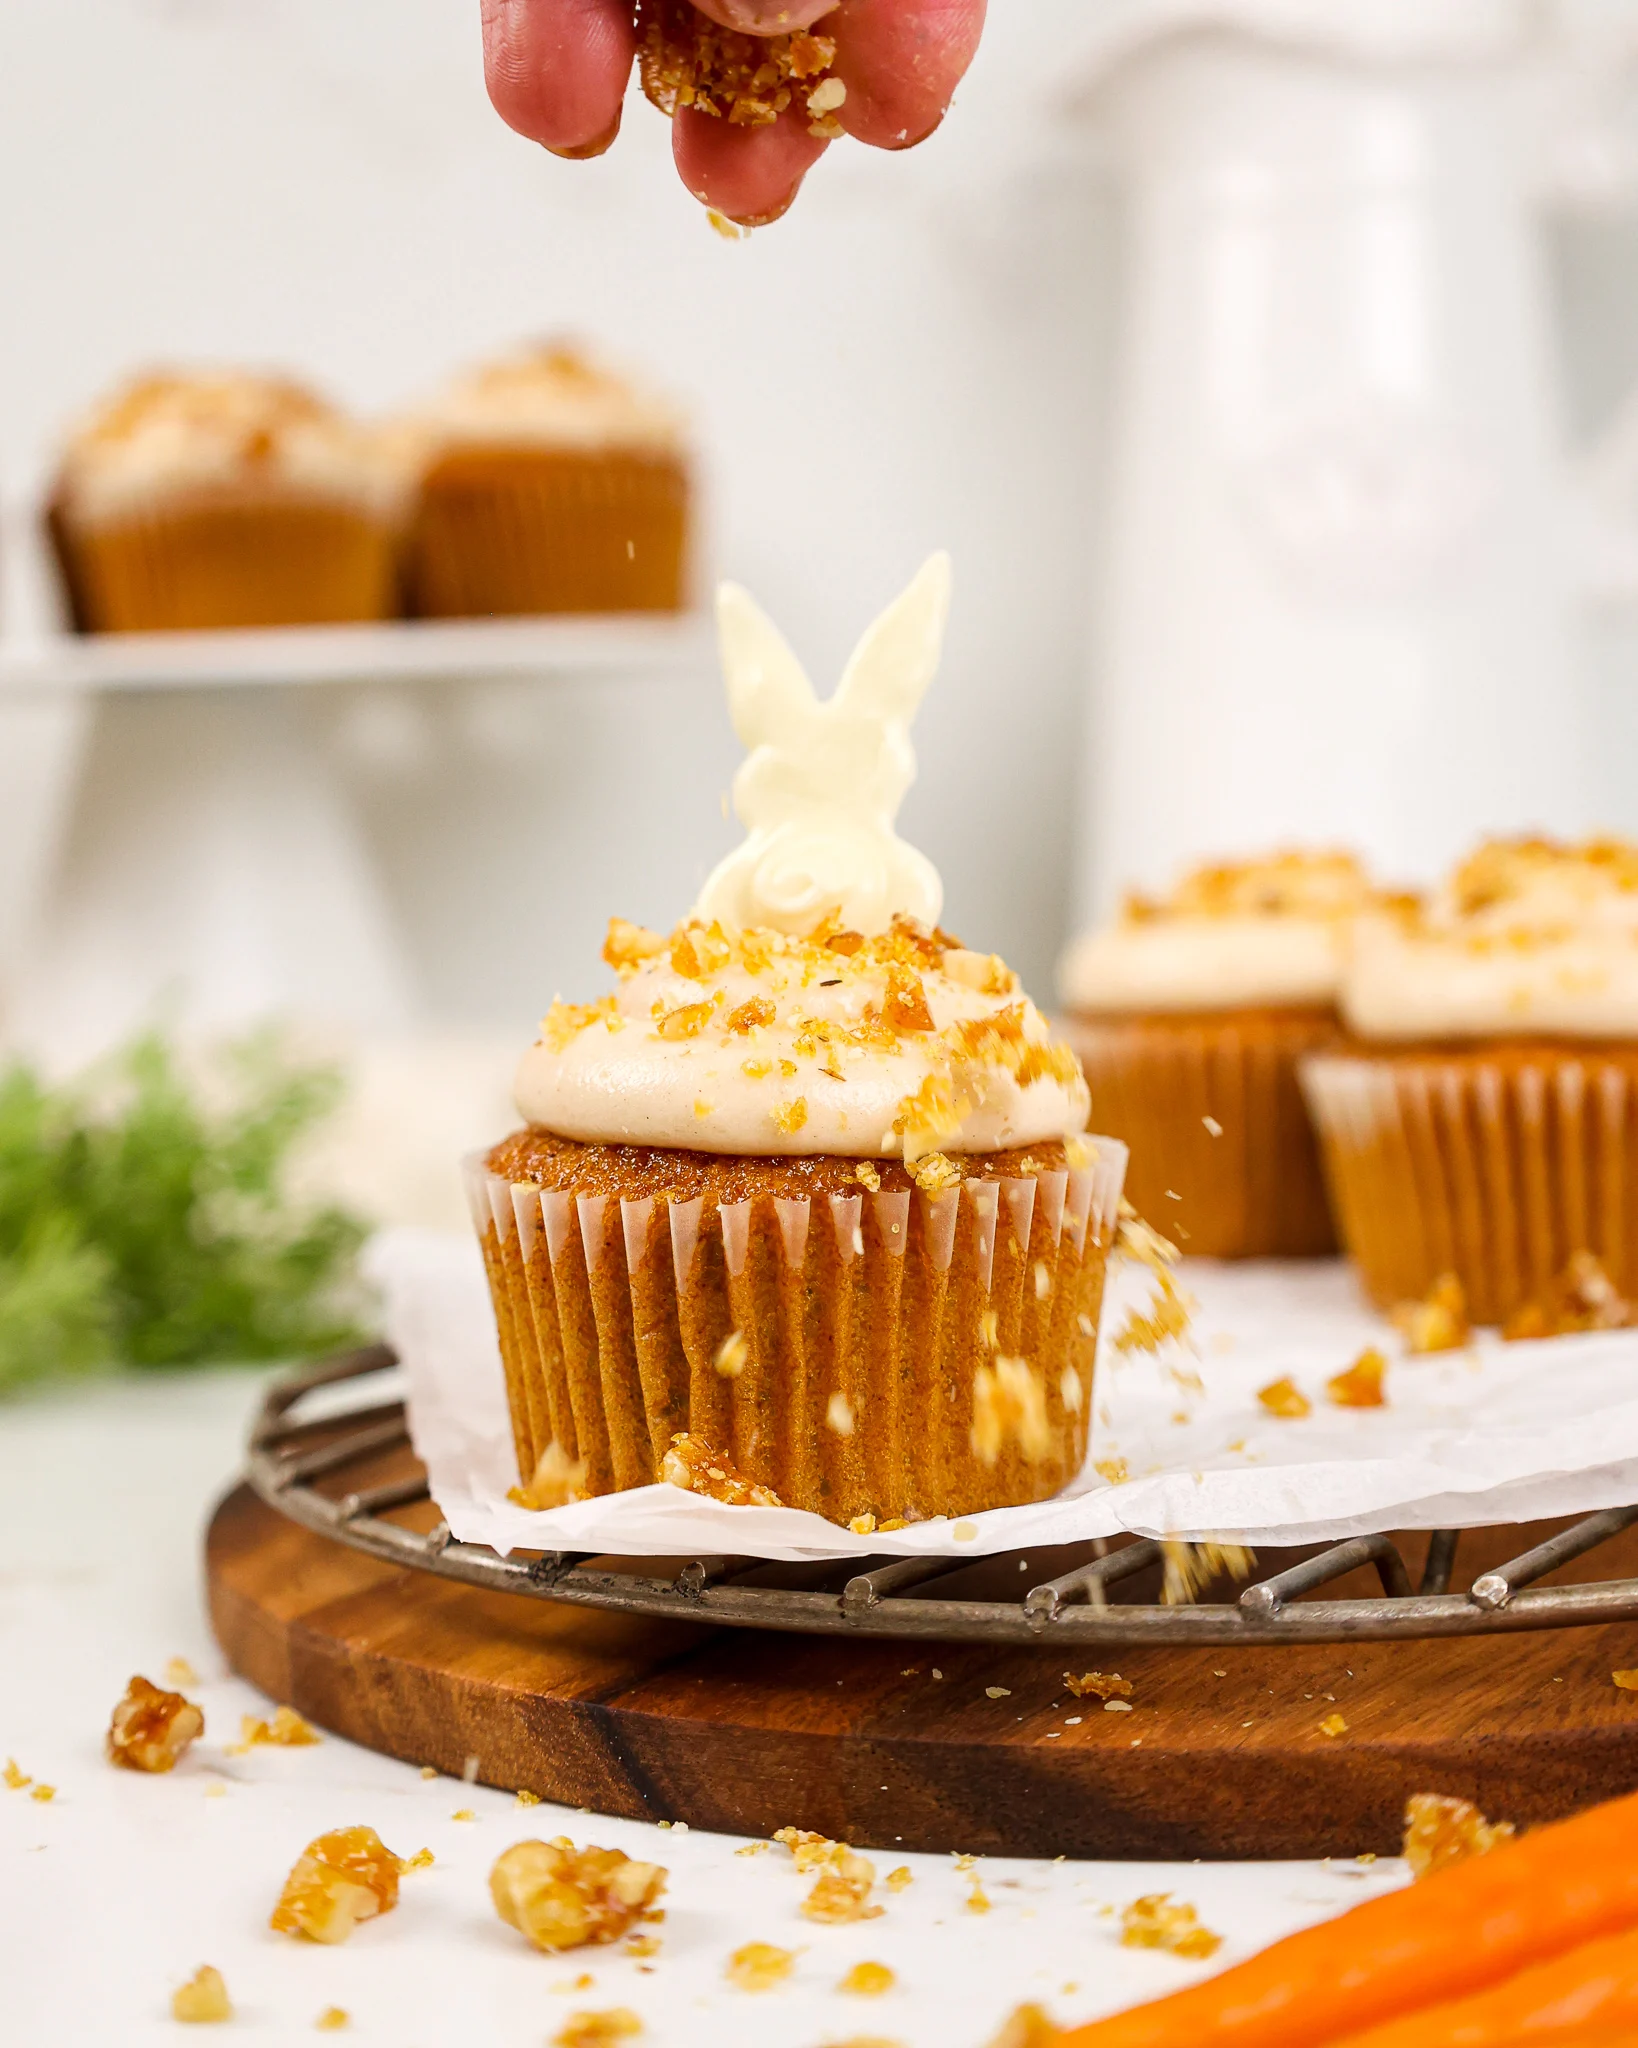 image of a walnut brittle topping being sprinkled over carrot cake cupcakes